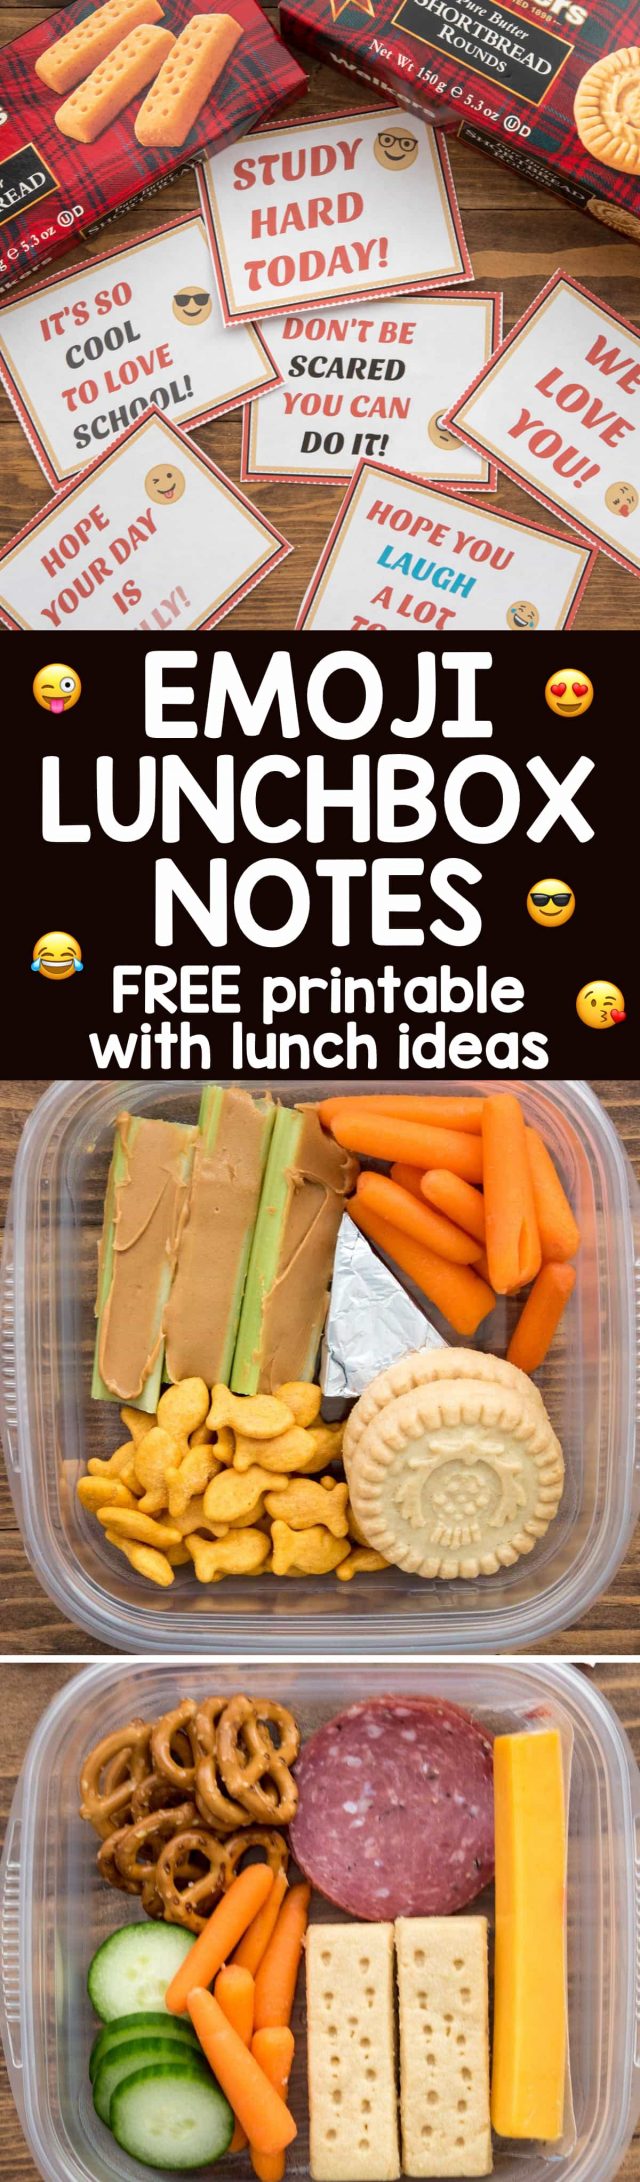 Emoji Lunchbox Notes are the cutest free printable notes ever! Your kids will love them, along with these easy lunch ideas for back to school.